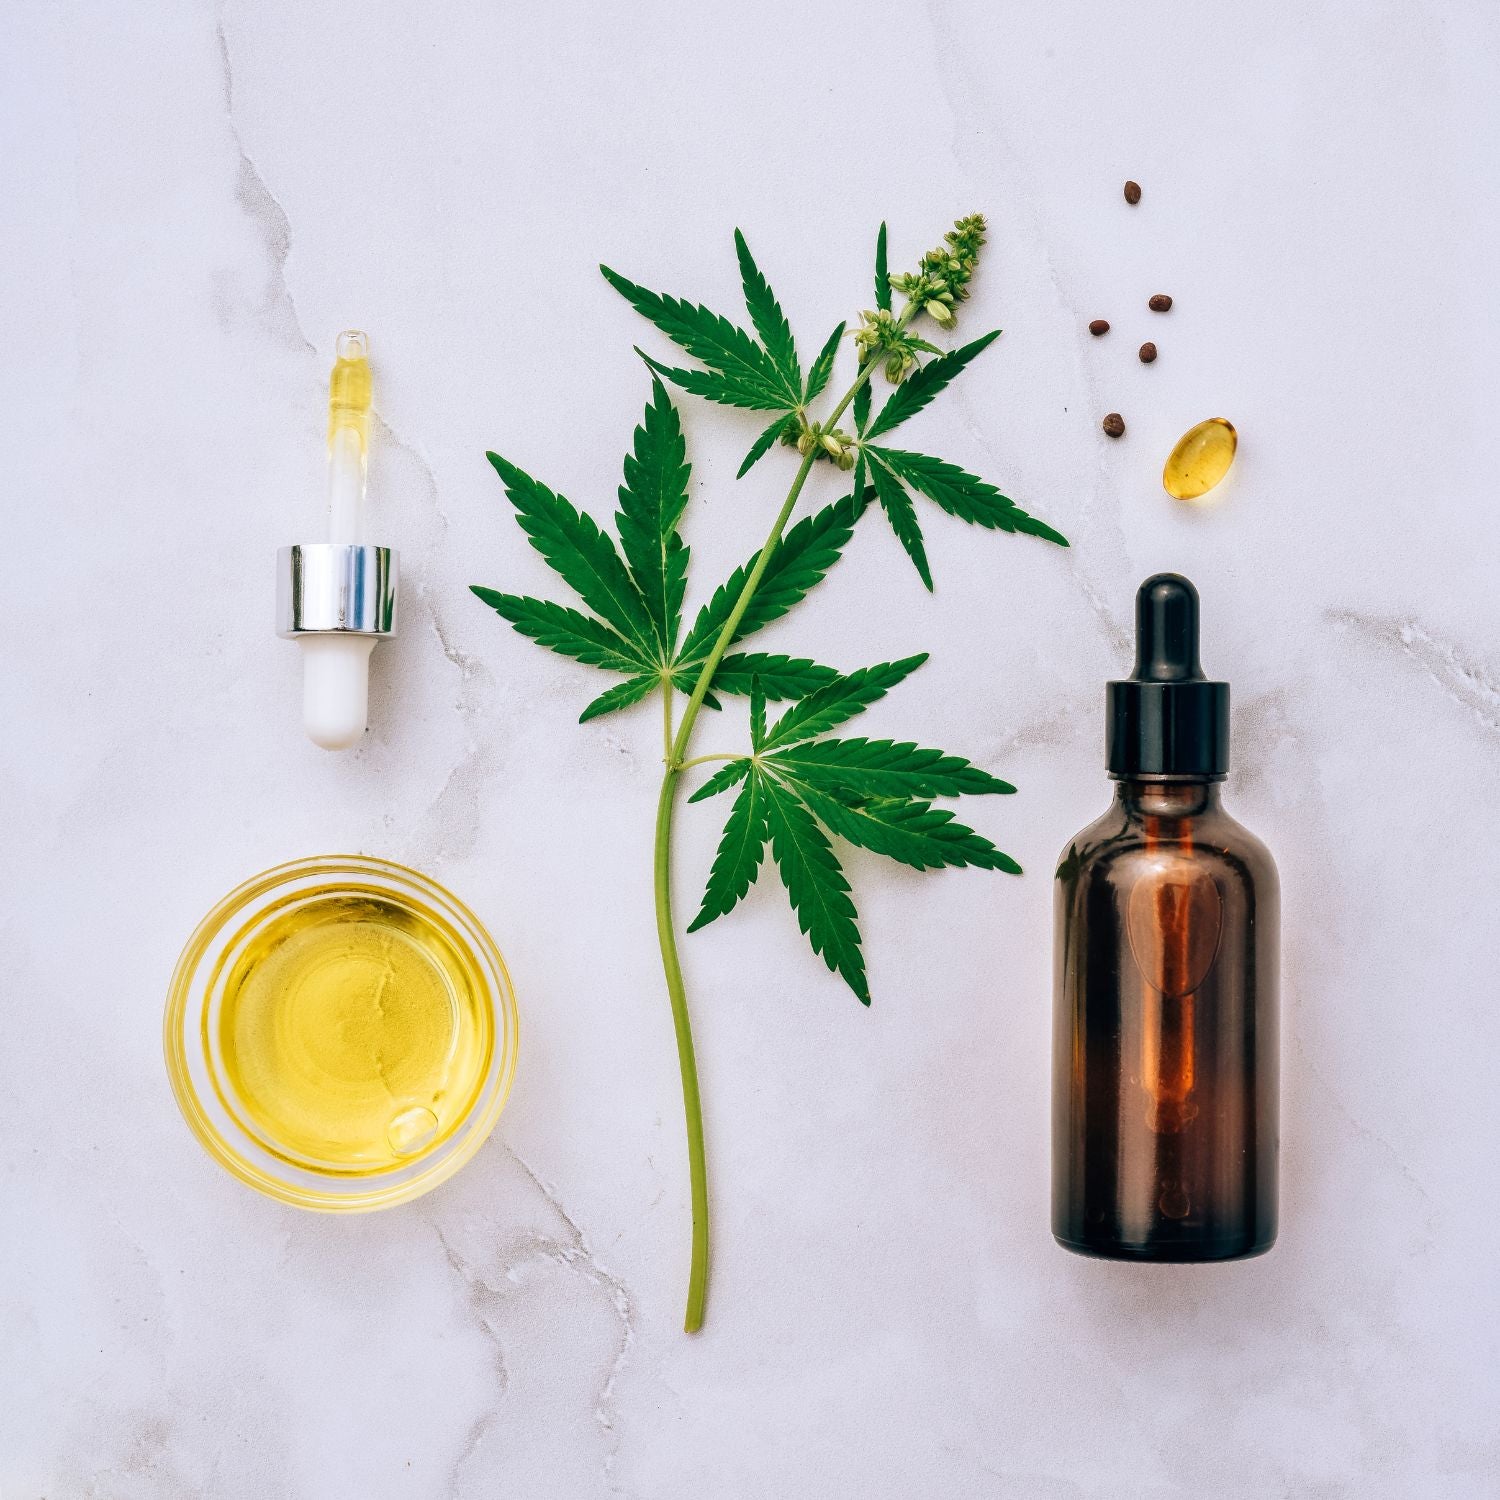 CBD Oil with CBD plant and bottle